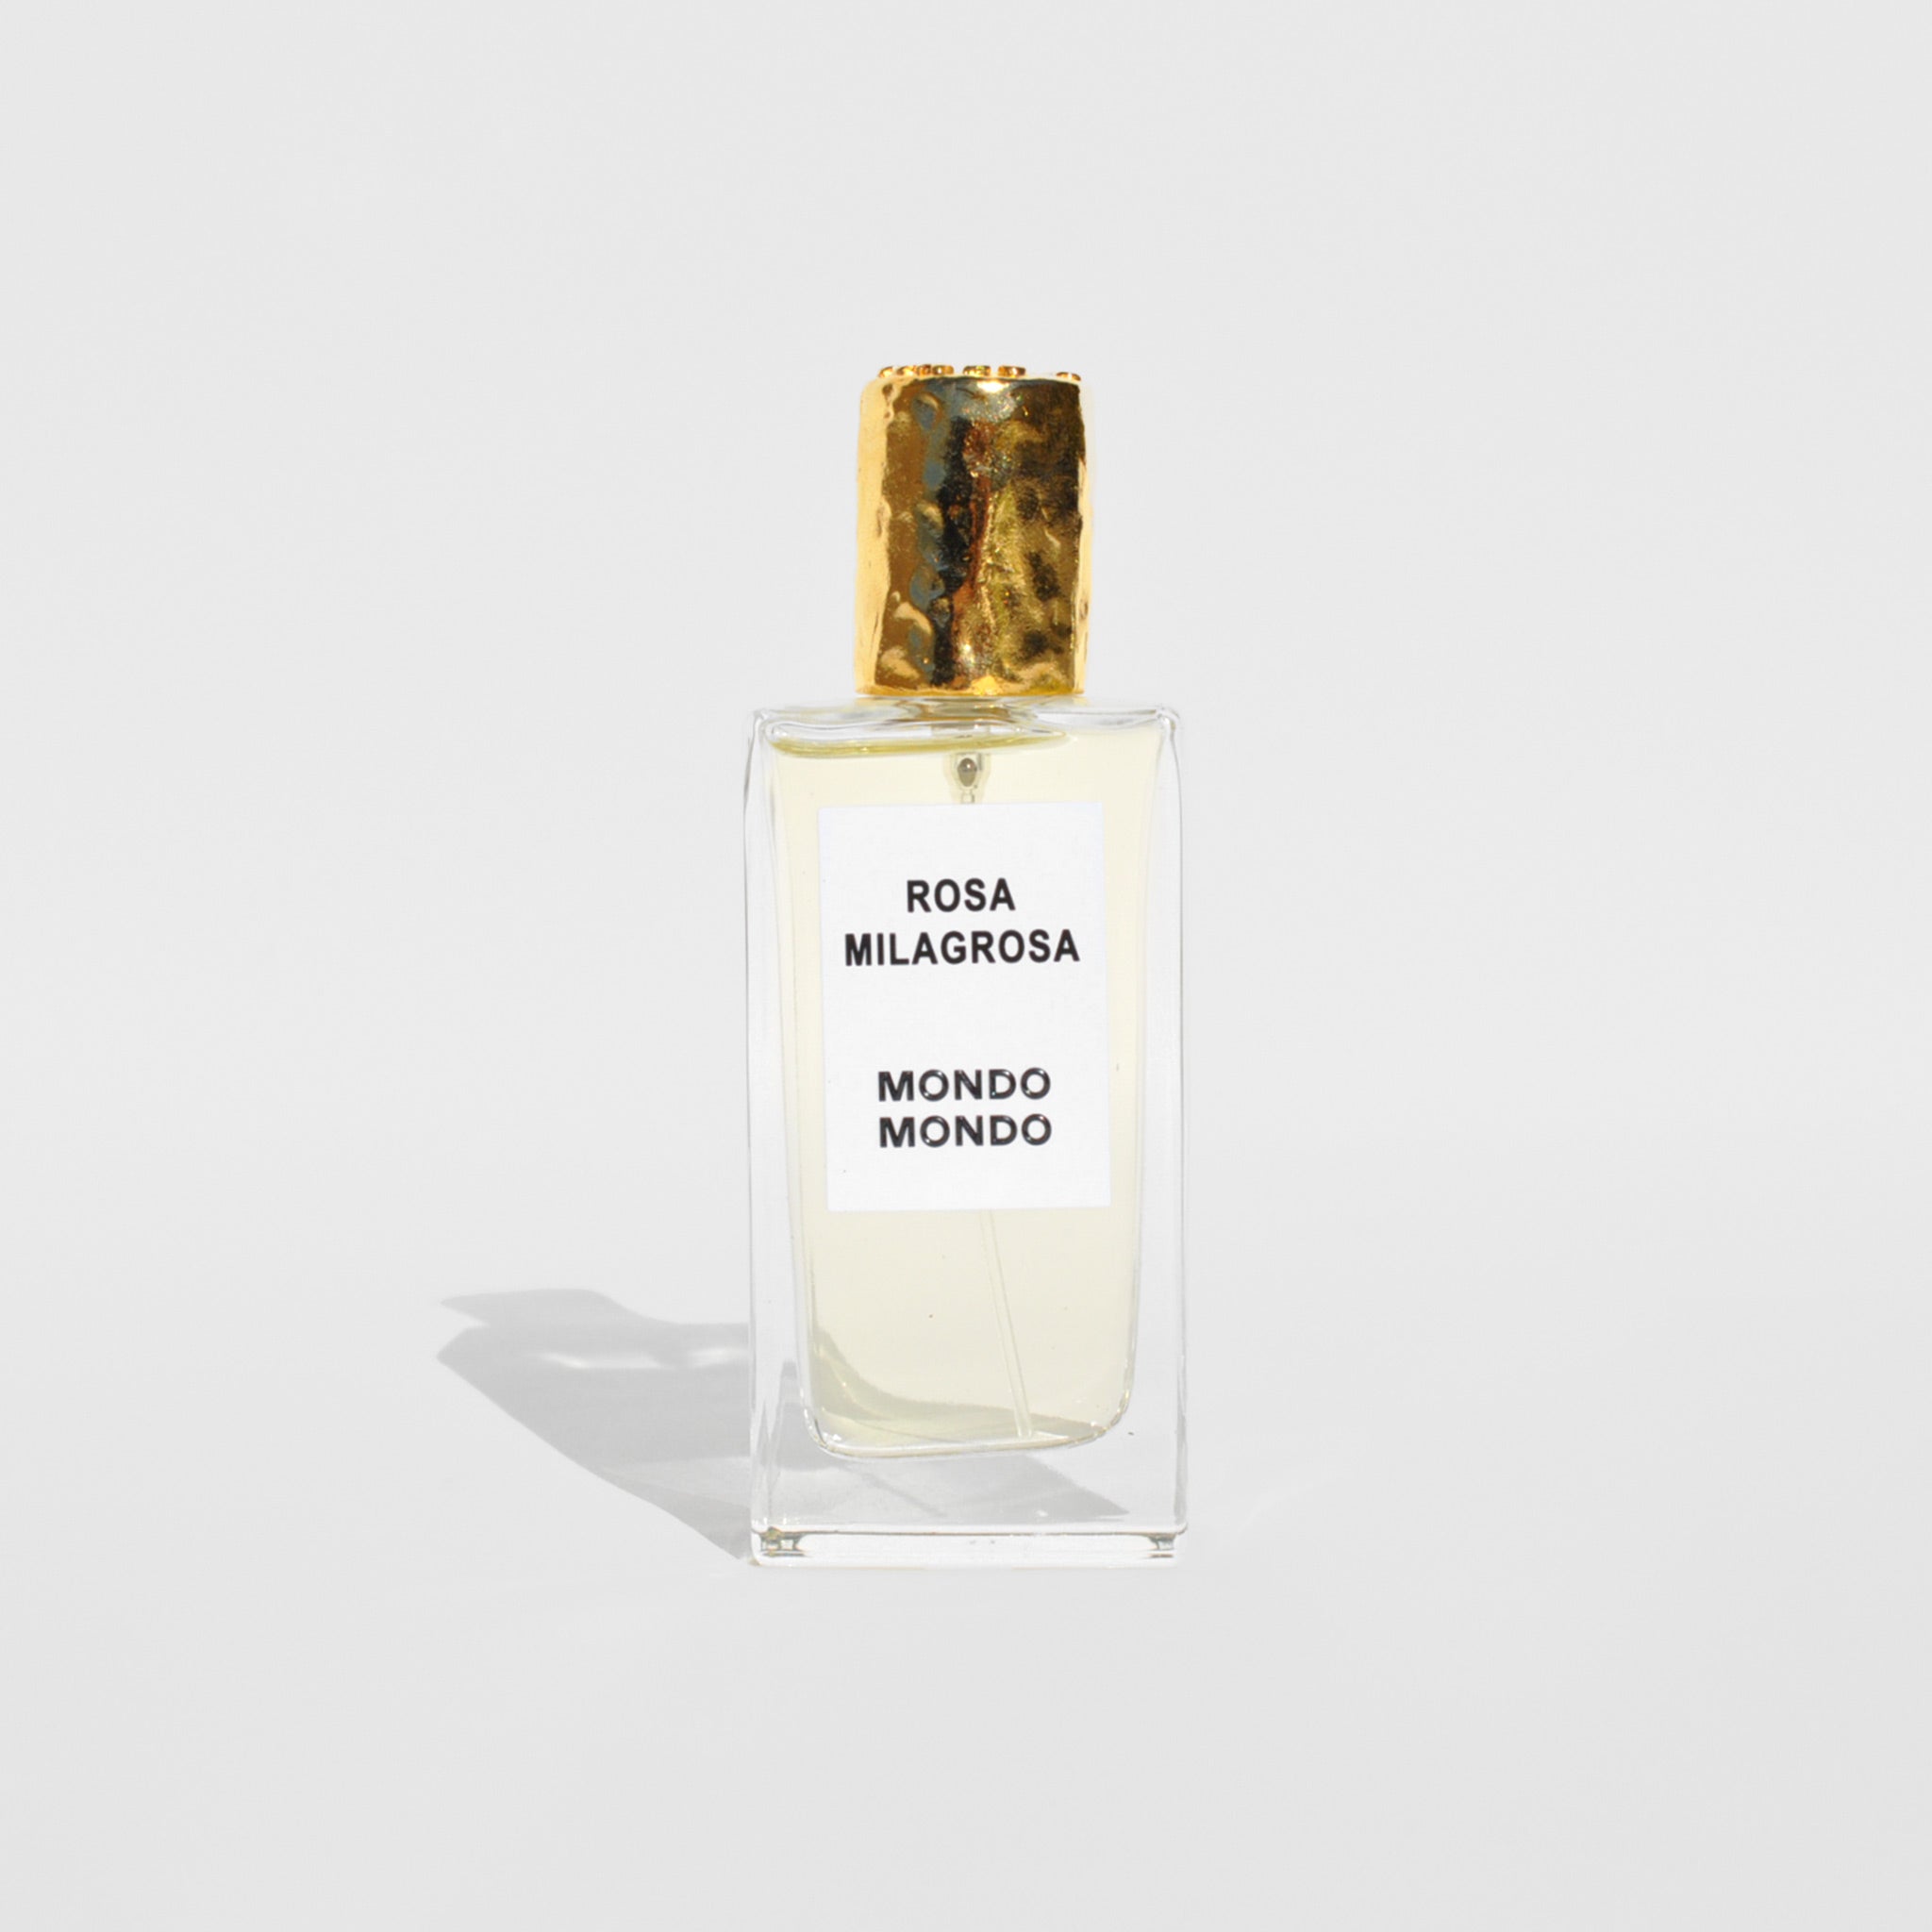 Flat image of the rosa Milagrosa eau de perfum by Mondo Mondo. This perfume is off white with a gold top.